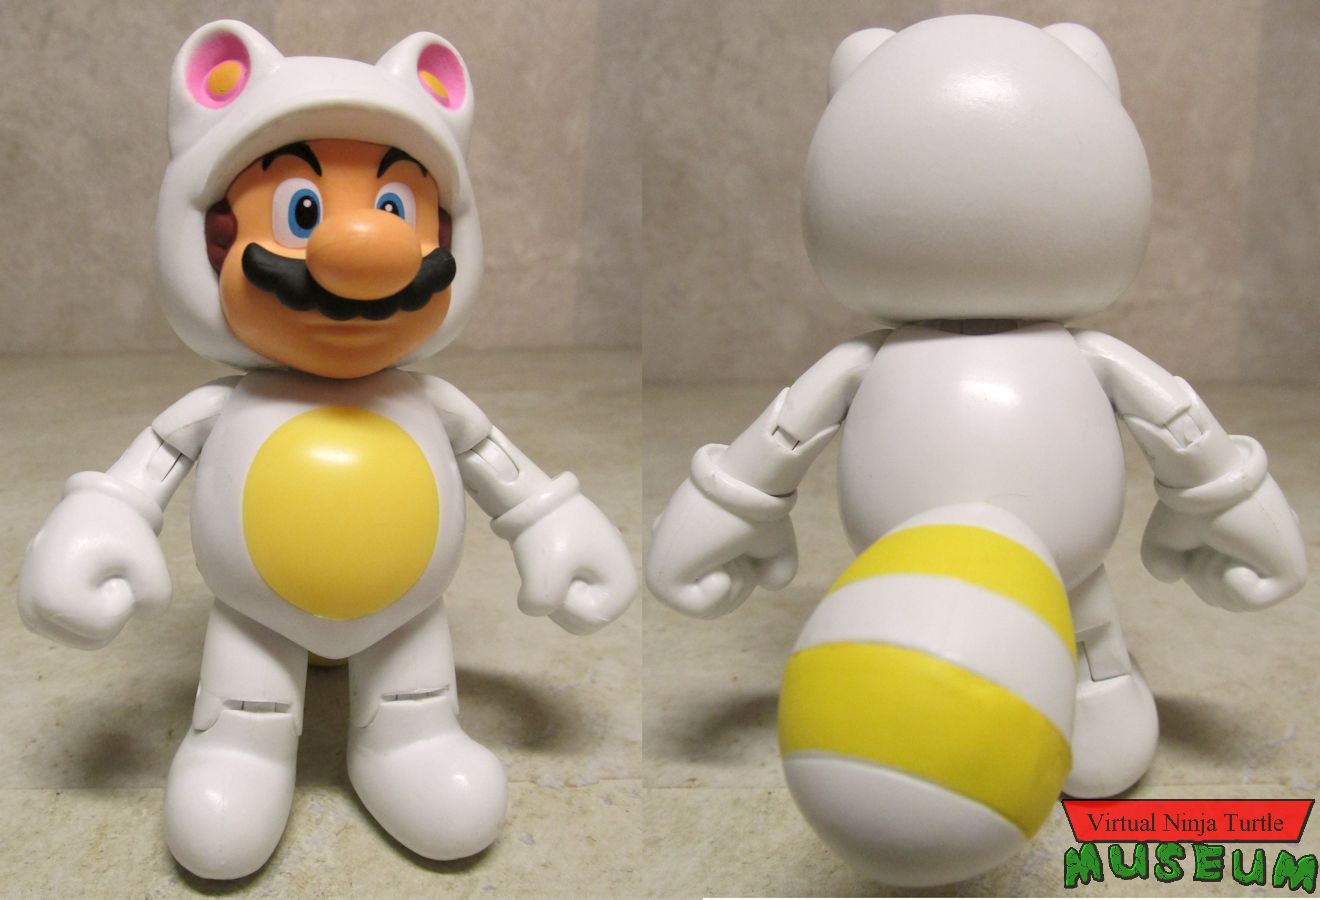 White Tanooki Mario front and back